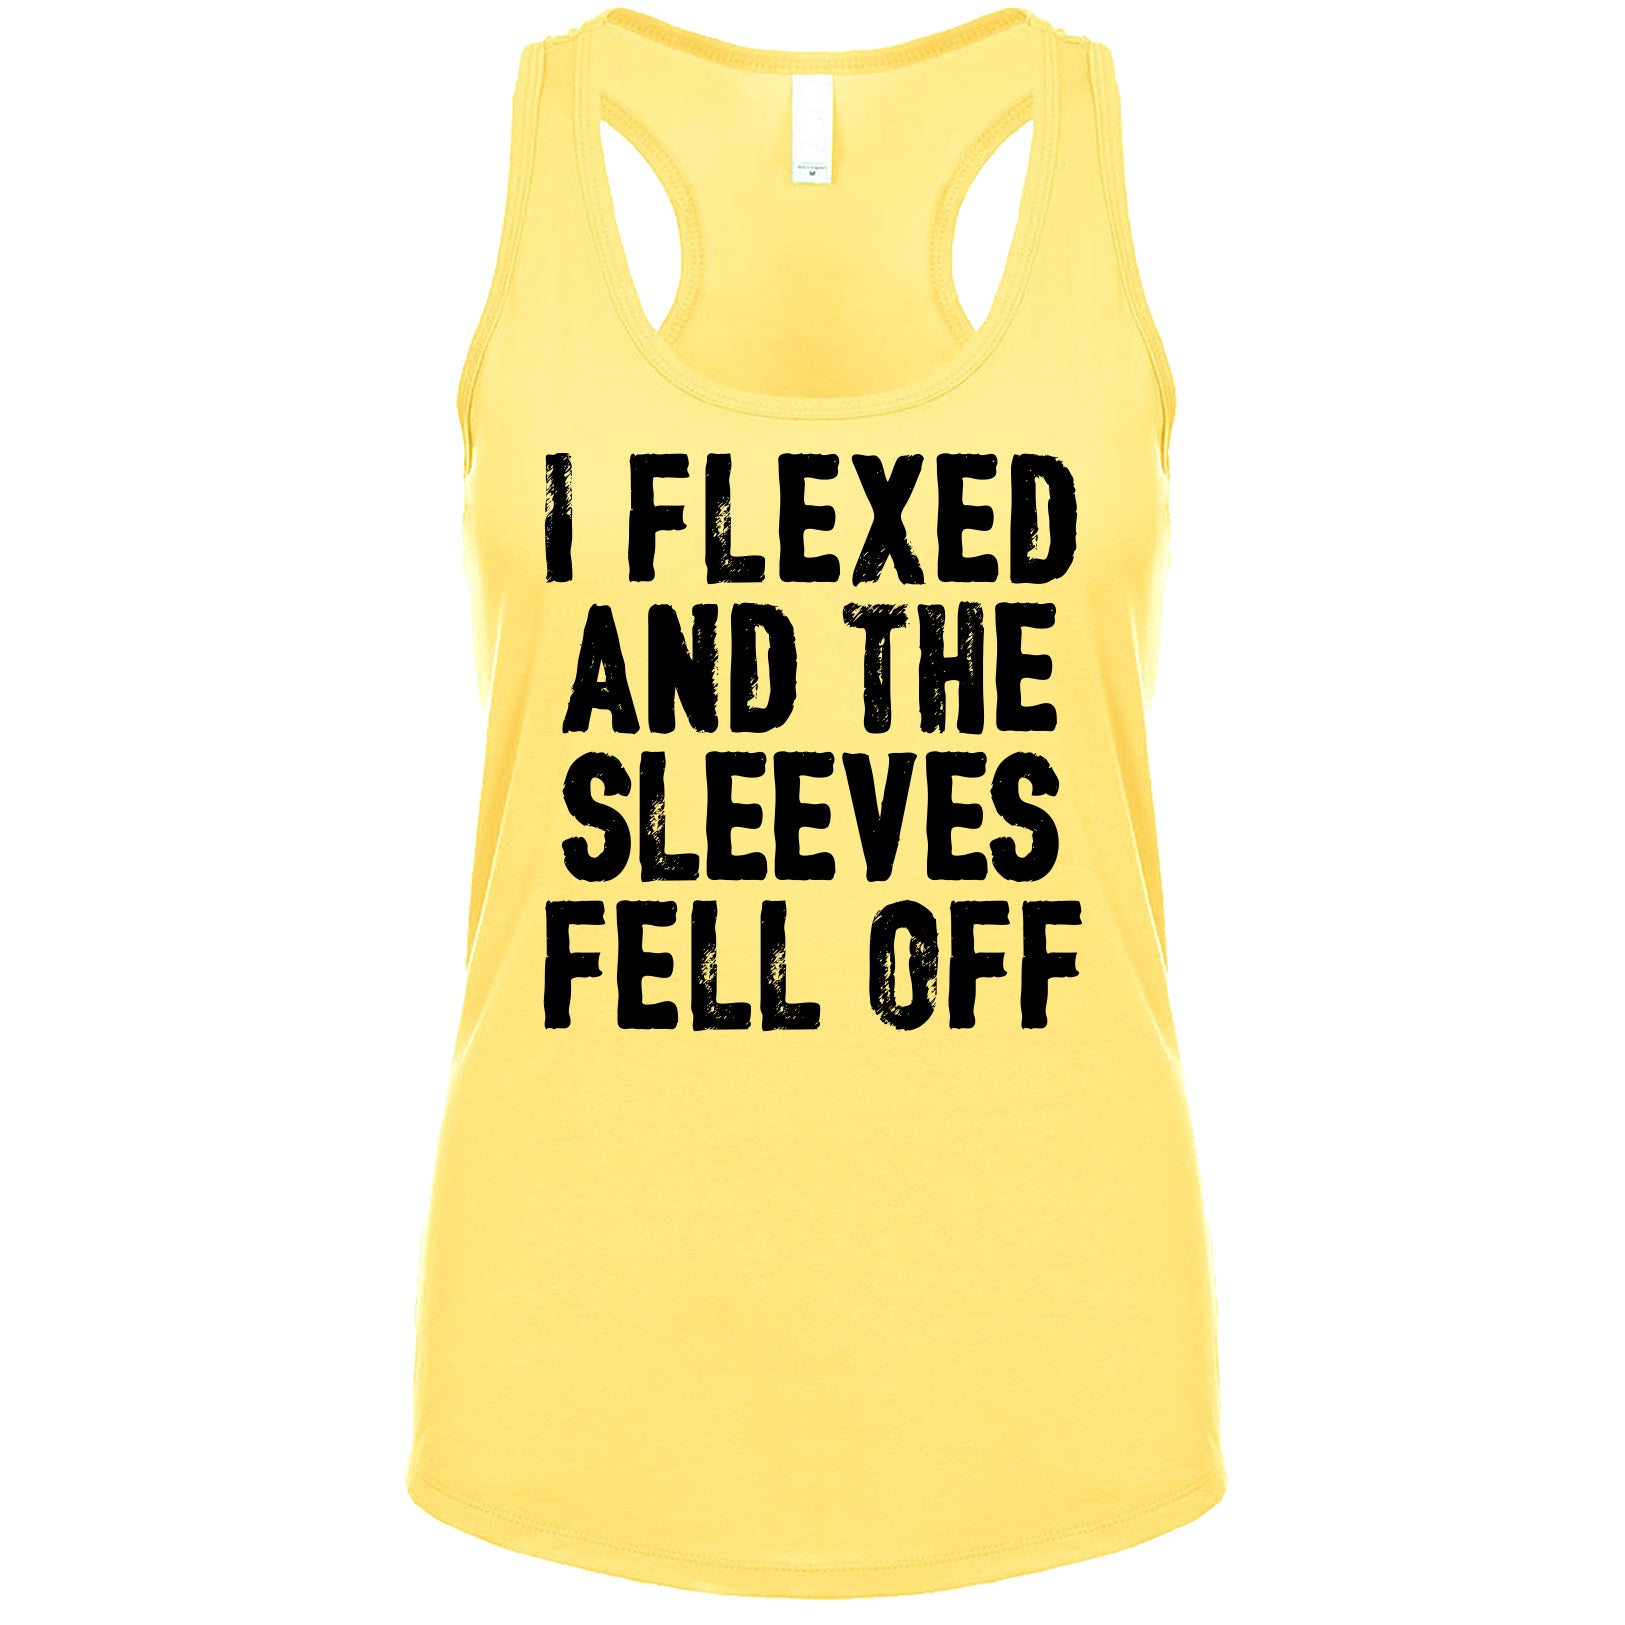 I Flexed And The Sleeves Fell Off Women's Tank